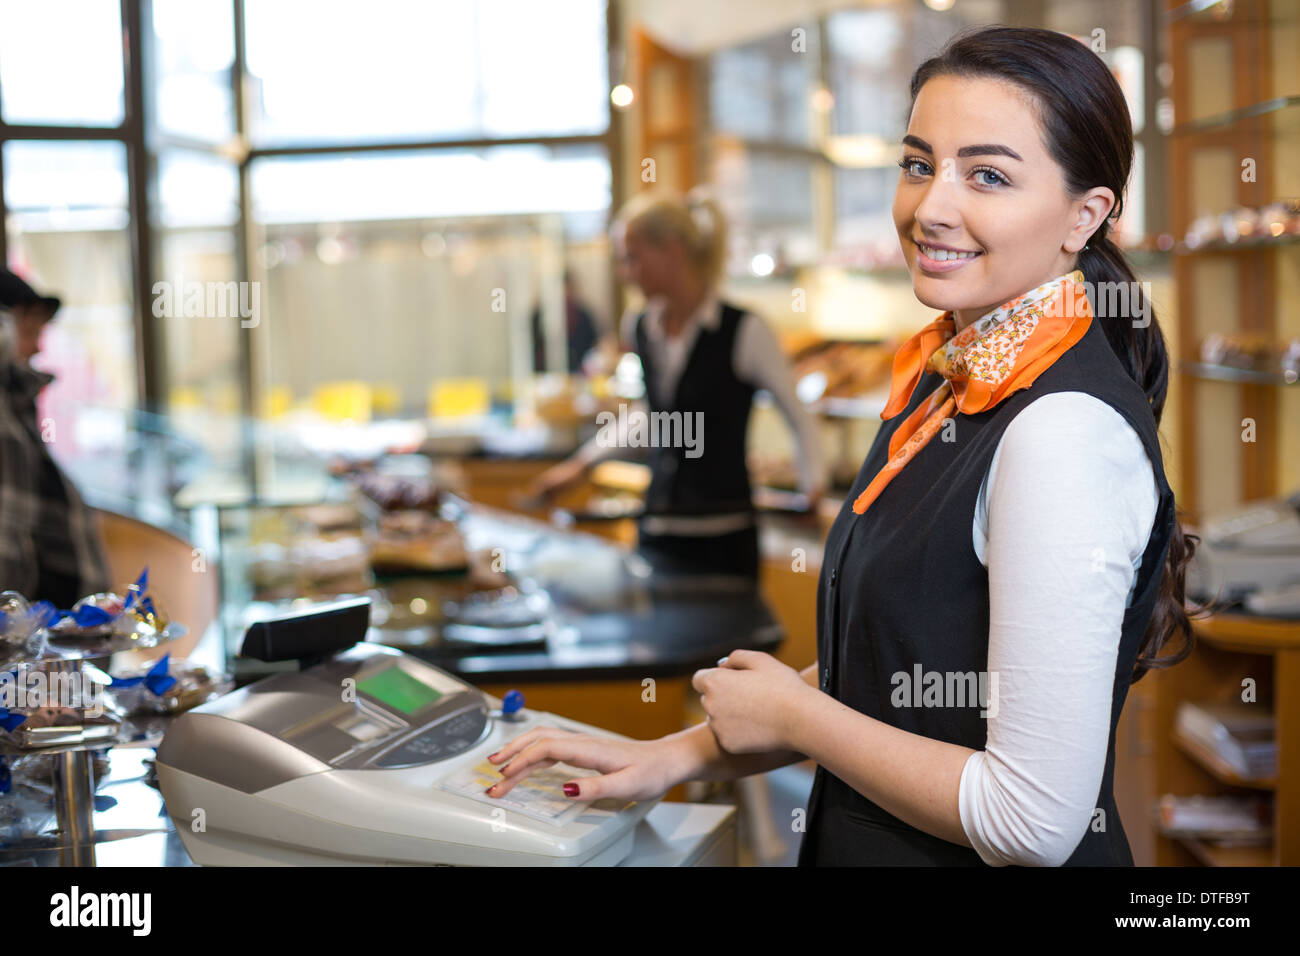 Shopkeeper and saleswoman at cash register or checkout counter Stock Photo